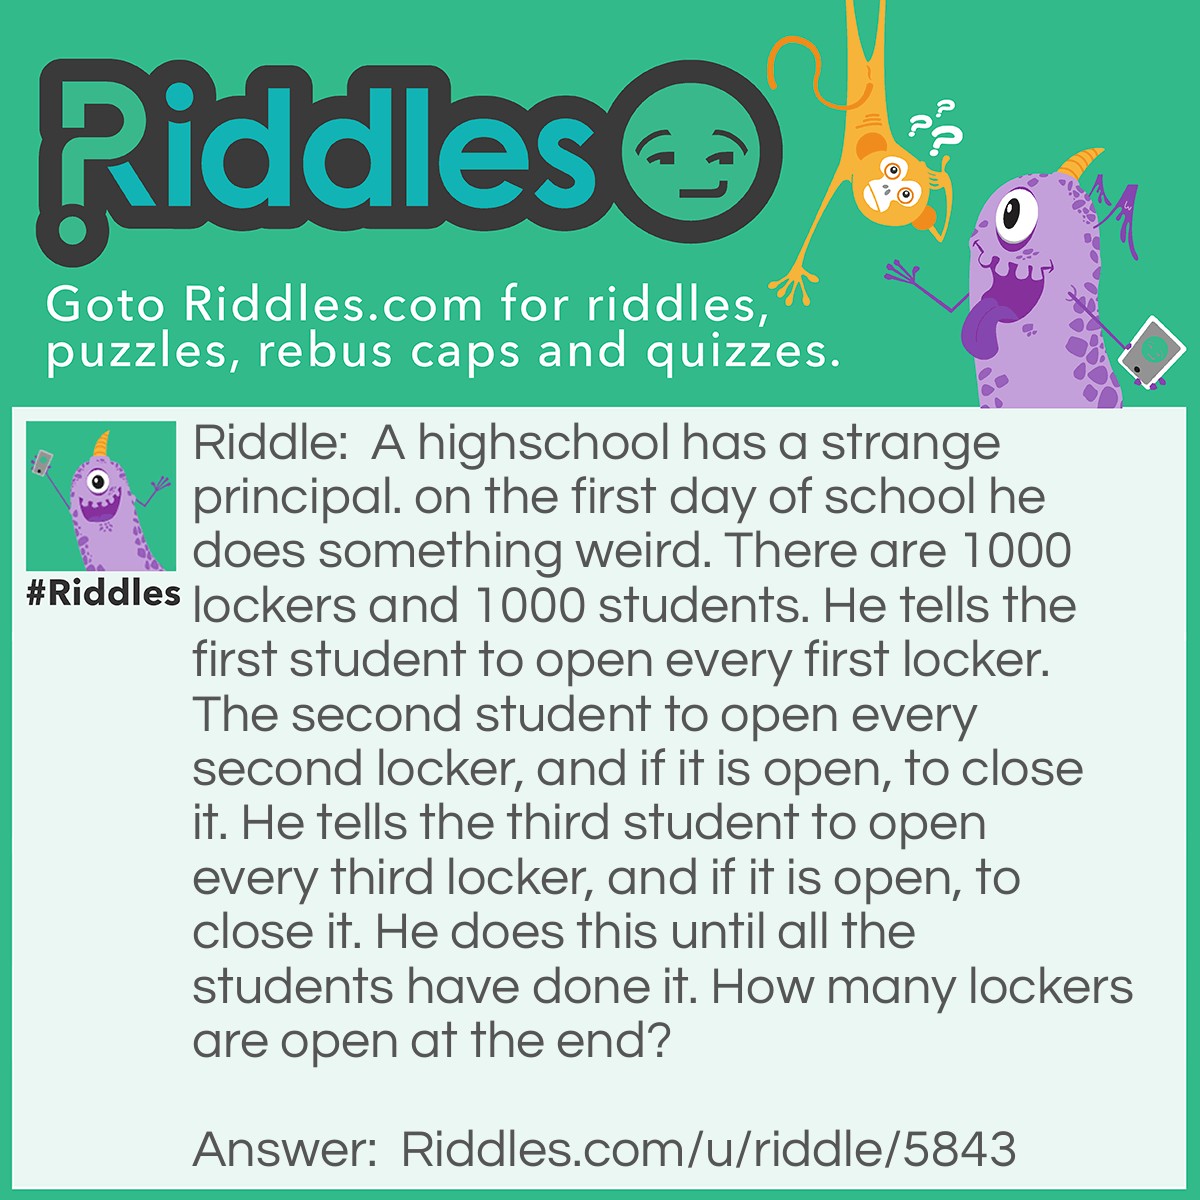 Riddle: A highschool has a strange principal. on the first day of school he does something weird. There are 1000 lockers and 1000 students. He tells the first student to open every first locker. The second student to open every second locker, and if it is open, to close it. He tells the third student to open every third locker, and if it is open, to close it. He does this until all the students have done it. How many lockers are open at the end? Answer: 31 lockers.